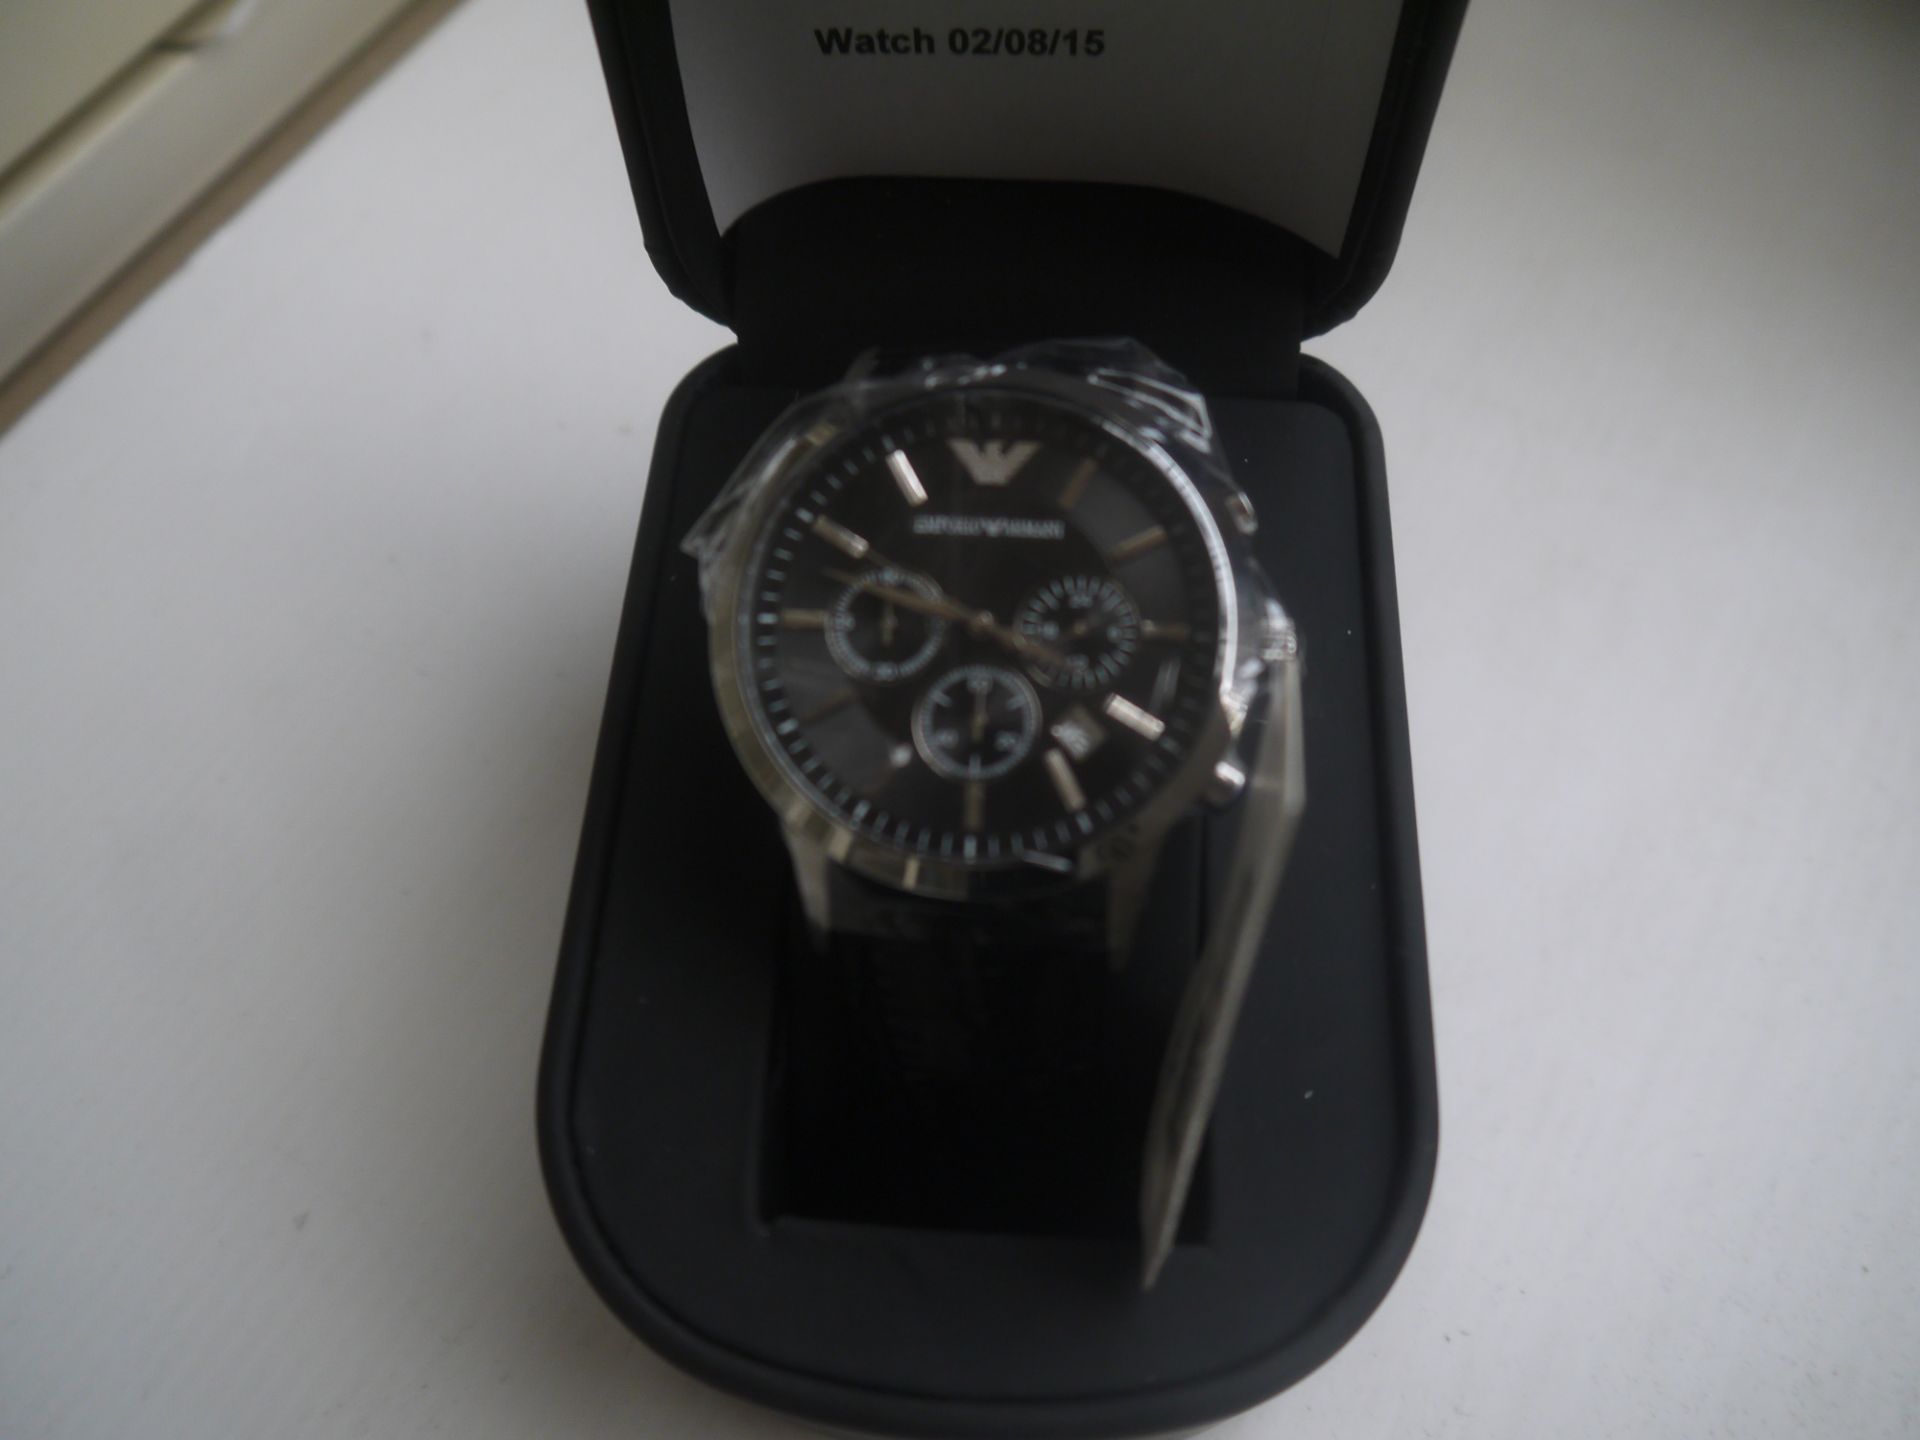 NO VAT!! Armani AR2447 Chronograph Gents Watch. New, boxed and ticking. With authentication card and